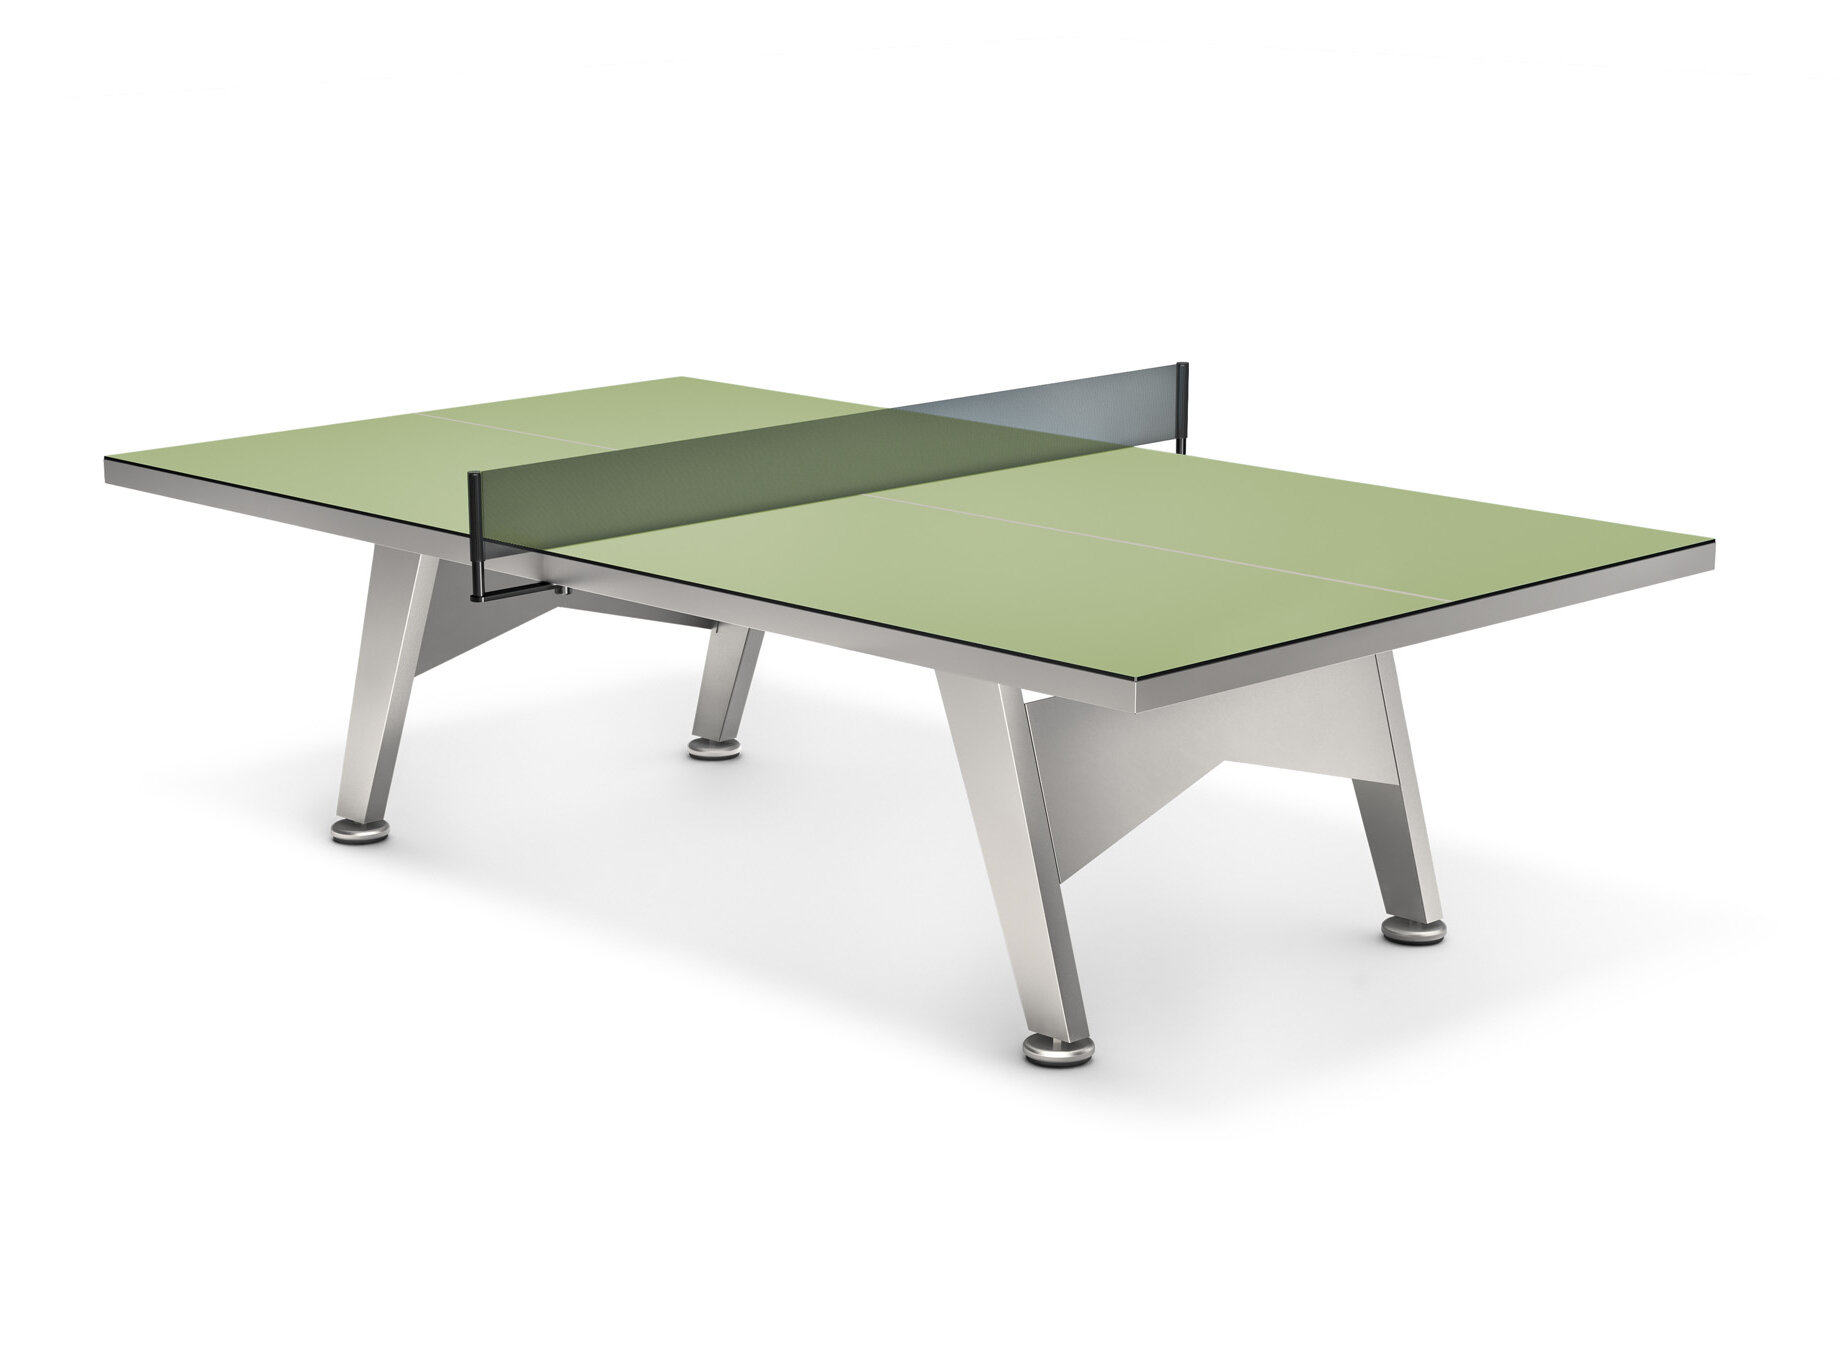 ping pong outdoor